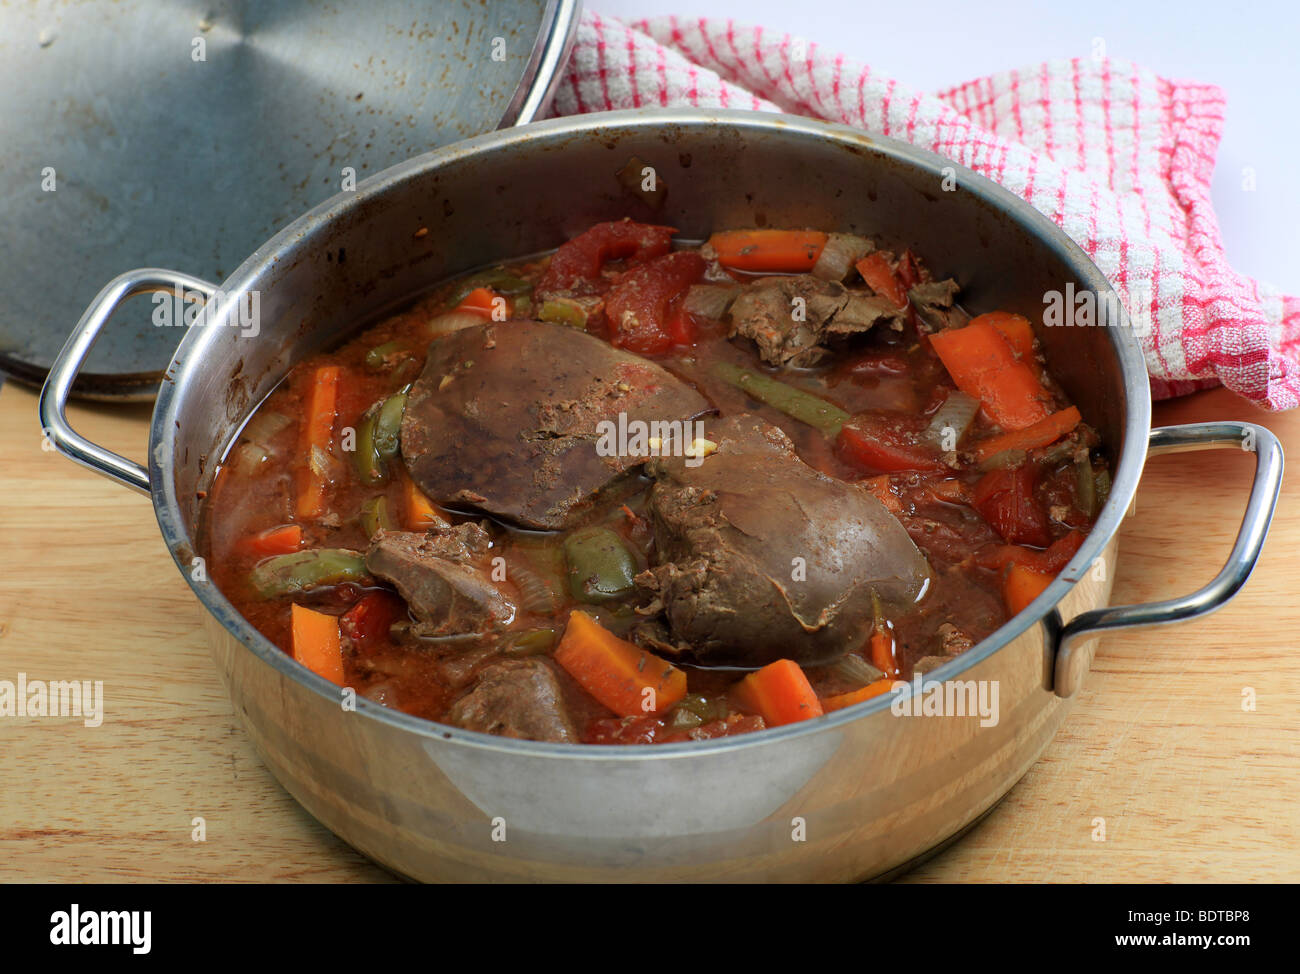 A lamb's liver and vegetable casserole straight from the oven Stock Photo